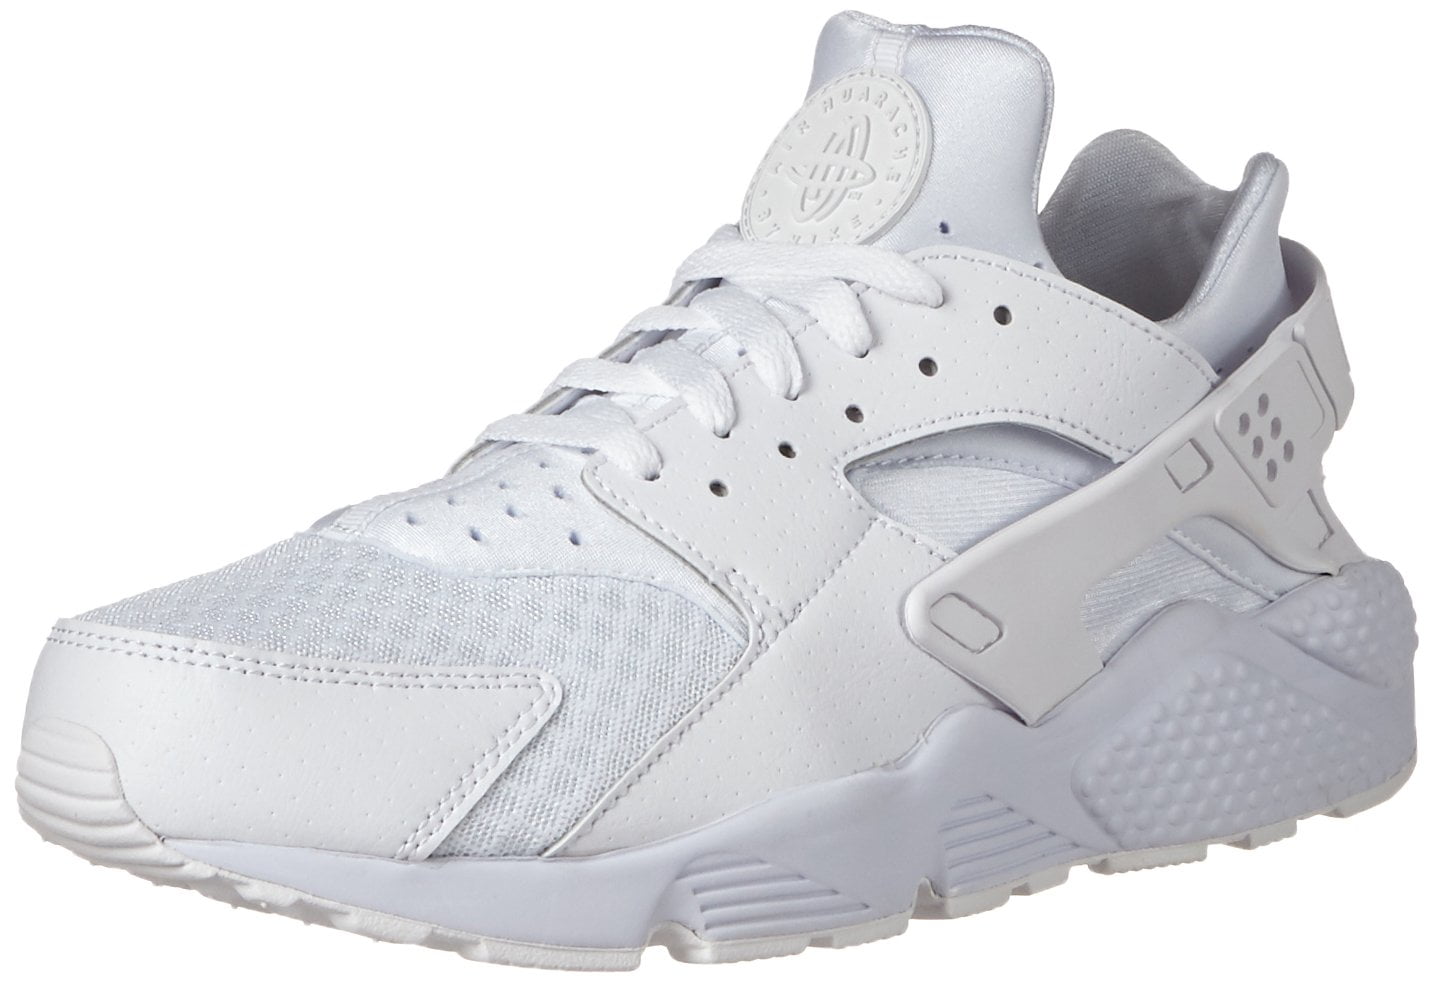 Nike Air Huarache Sneakers and Trainers | The Drop Date